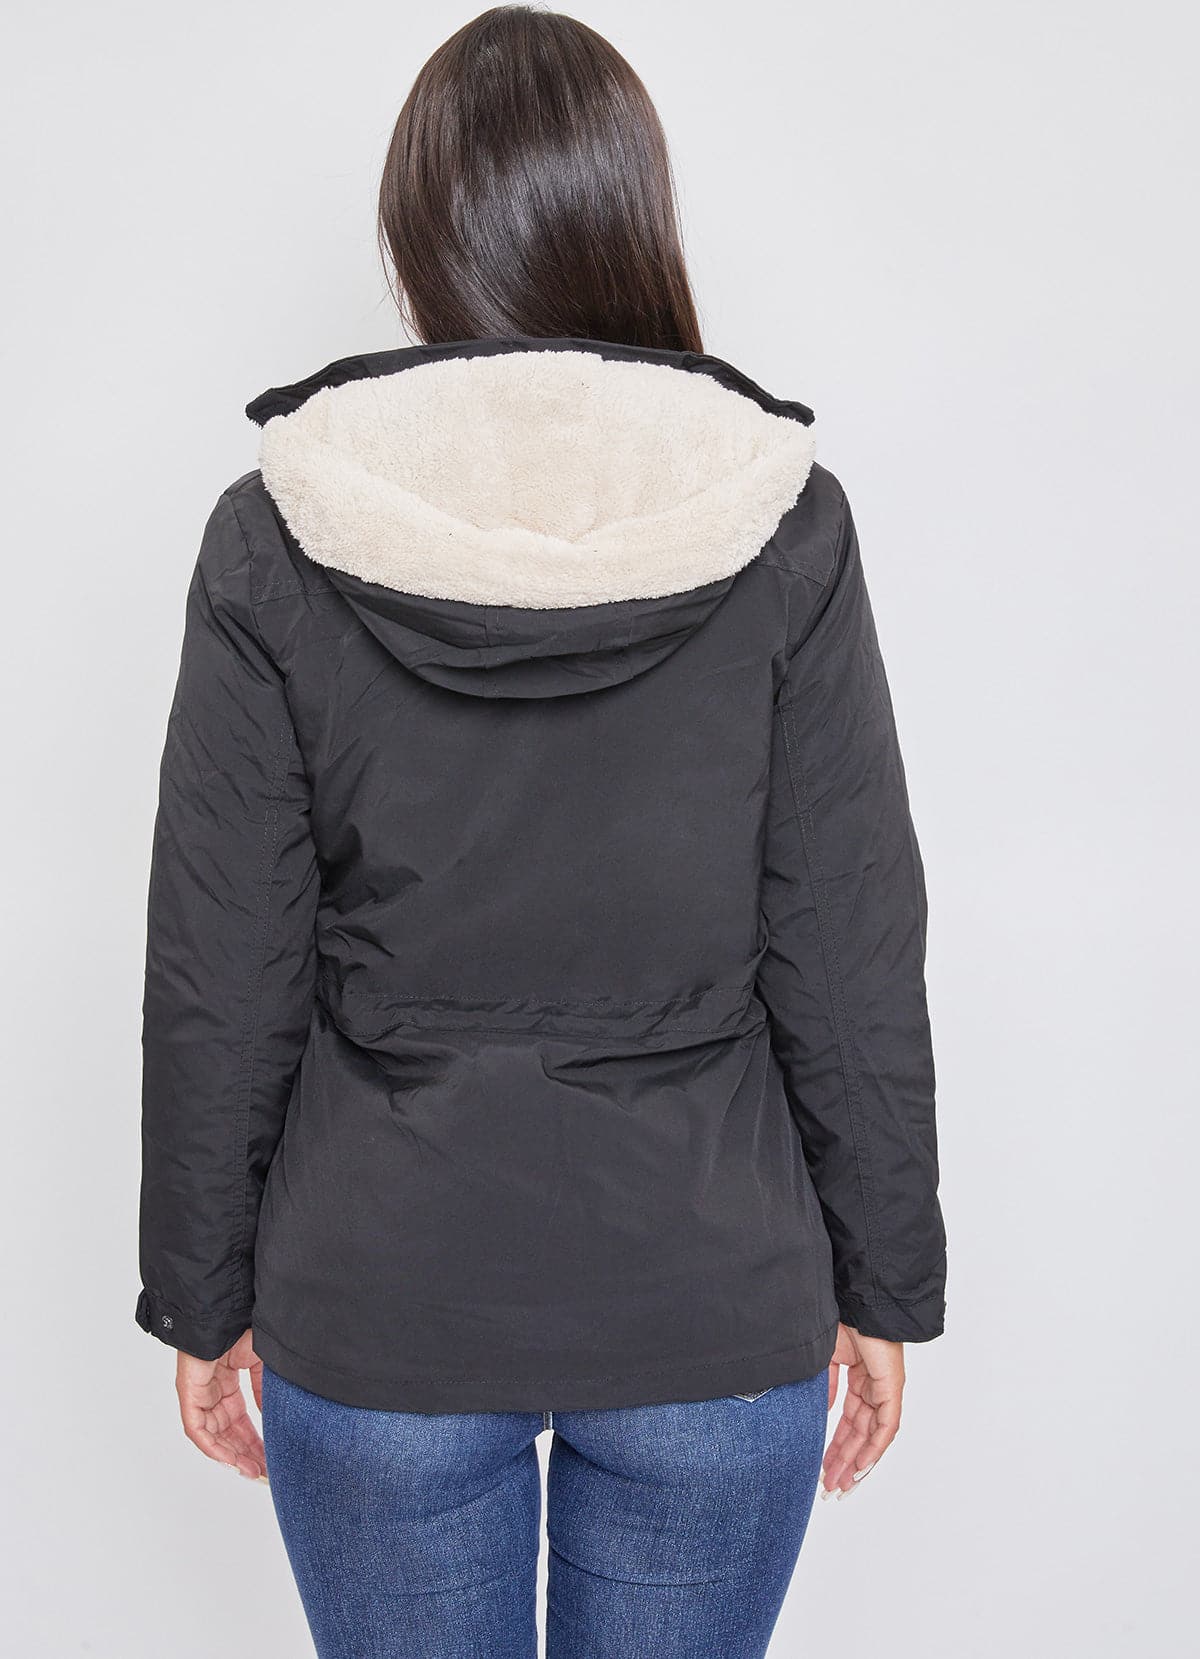 Women's Puffer Lined Shell Jacket with Fur Hood Deal